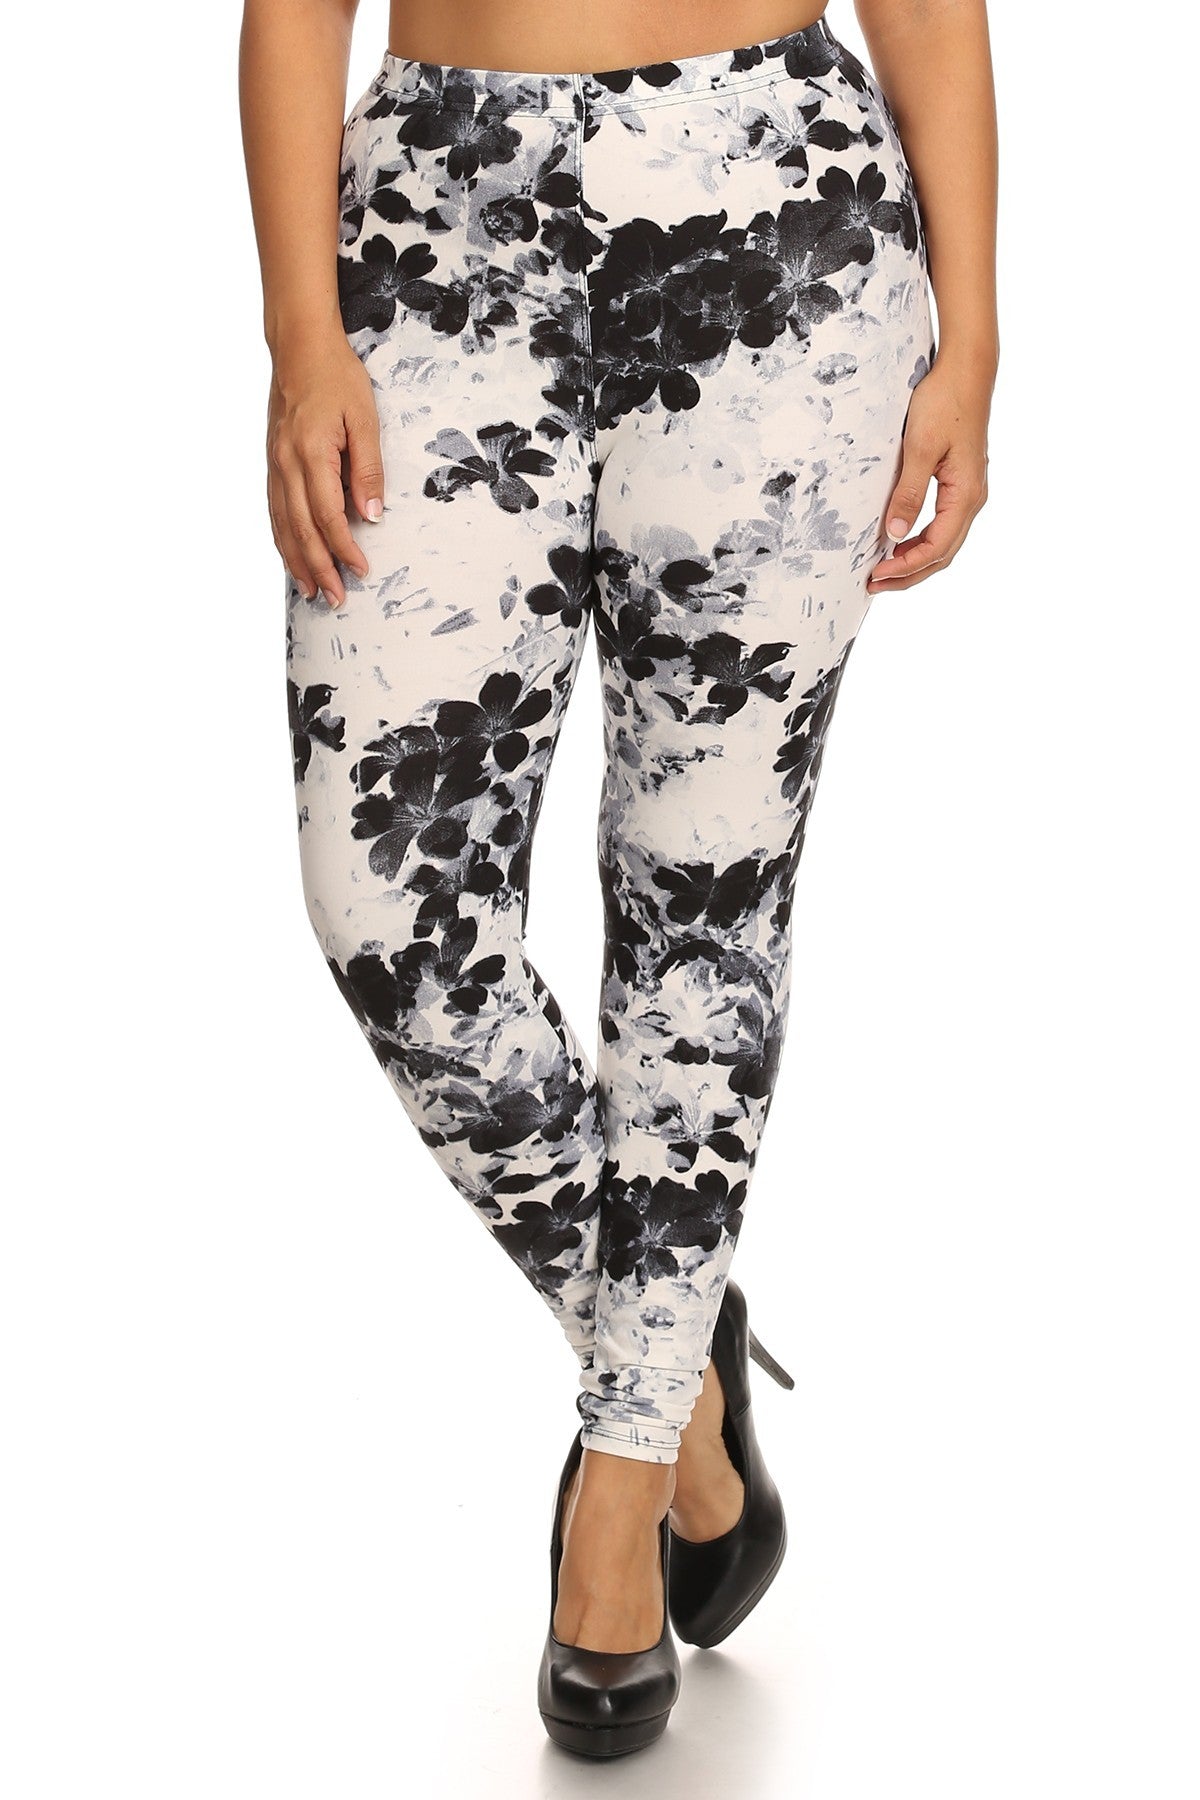 Super Soft Peach Skin Fabric, Floral Graphic Printed Knit Legging With Elastic Waist Detail